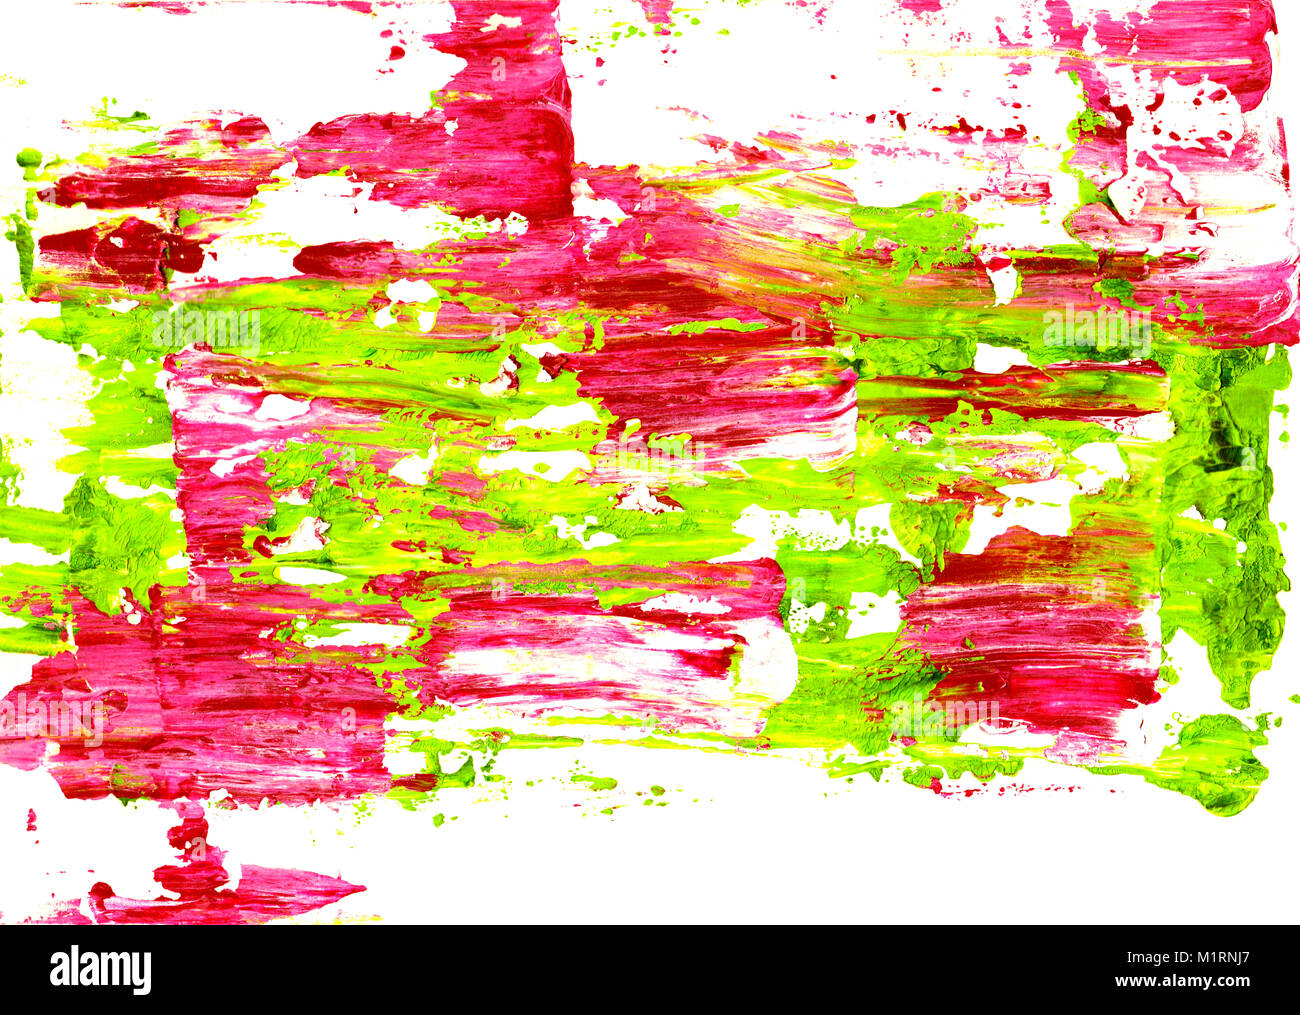 Vivid pink and green paint spread abstractly across white paper background Stock Photo